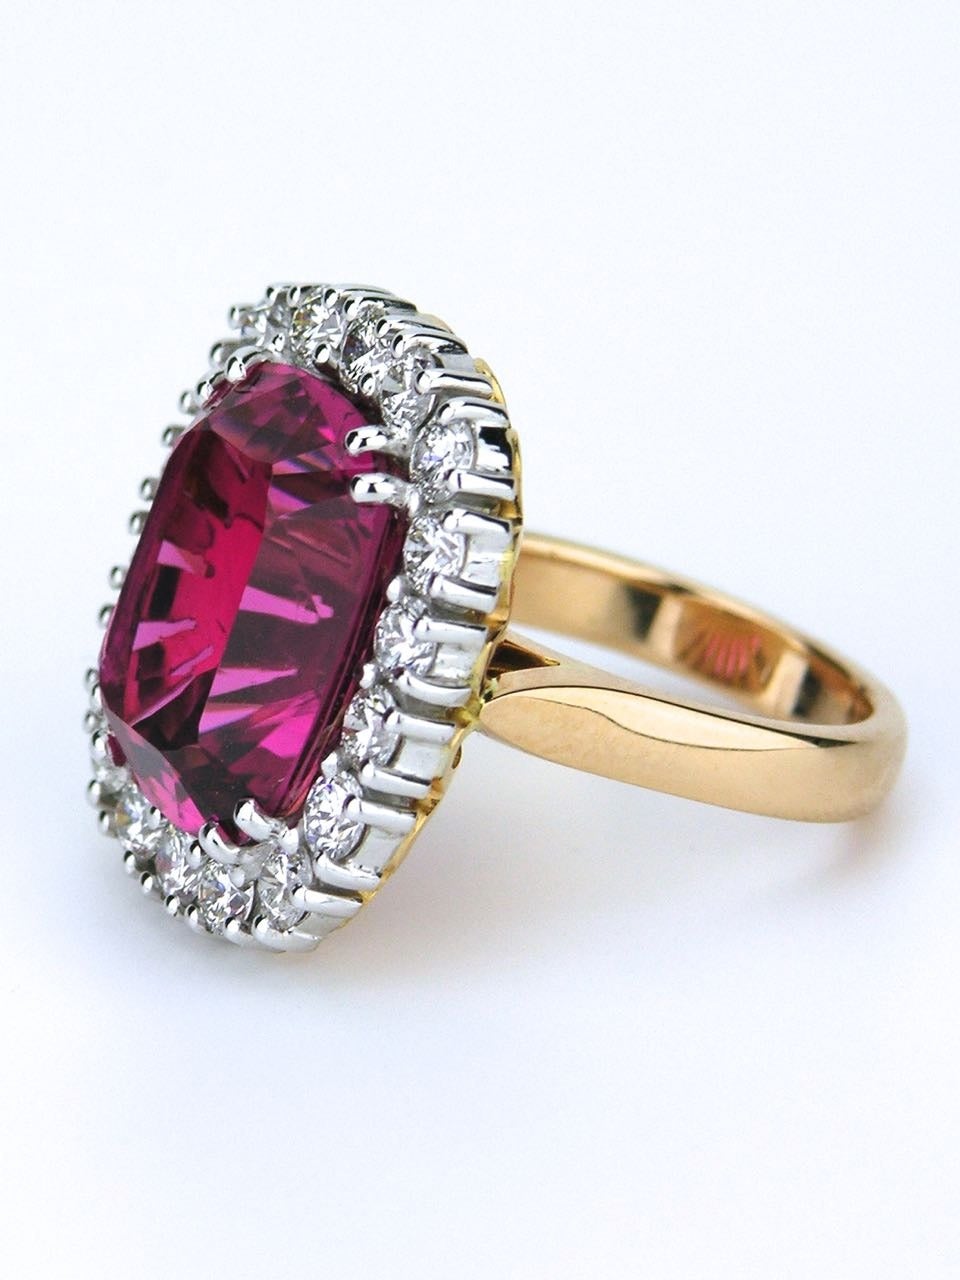 An exceptional tourmaline and diamond cluster ring consisting of a stunning, finest quality, intense pink tourmaline of very good clarity and excellent cut, four claw set in 18ct white gold, on 18ct light rose gold gallery and shank, within a border